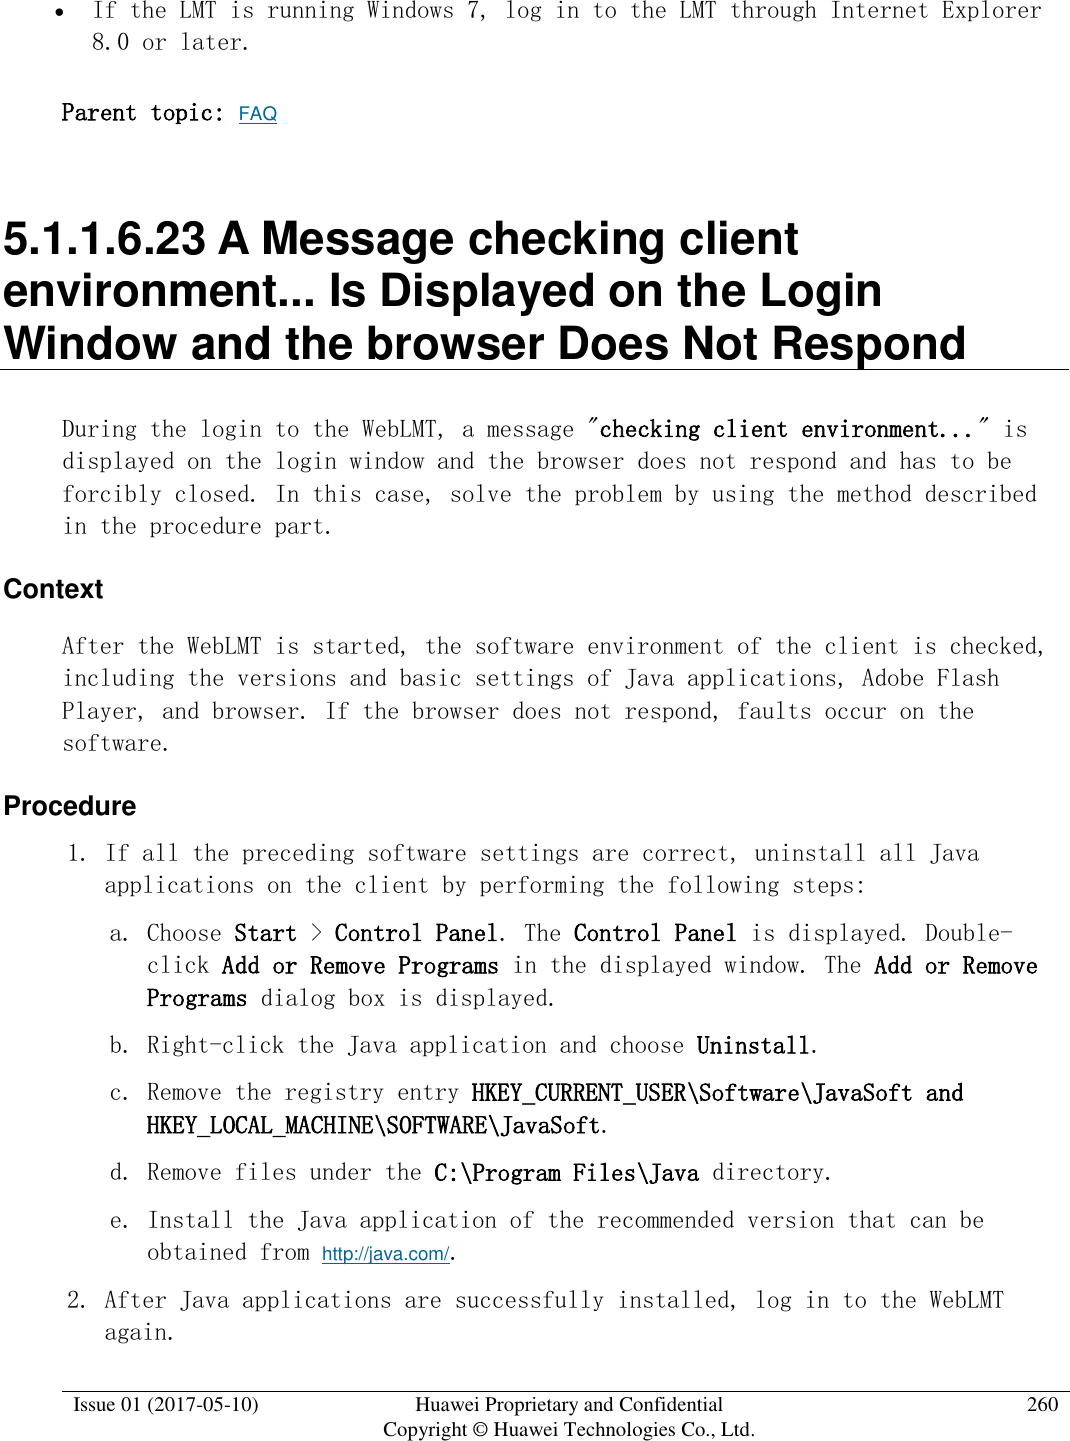  Issue 01 (2017-05-10) Huawei Proprietary and Confidential      Copyright © Huawei Technologies Co., Ltd. 260   If the LMT is running Windows 7, log in to the LMT through Internet Explorer 8.0 or later.  Parent topic: FAQ 5.1.1.6.23 A Message checking client environment... Is Displayed on the Login Window and the browser Does Not Respond During the login to the WebLMT, a message &quot;checking client environment...&quot; is displayed on the login window and the browser does not respond and has to be forcibly closed. In this case, solve the problem by using the method described in the procedure part. Context After the WebLMT is started, the software environment of the client is checked, including the versions and basic settings of Java applications, Adobe Flash Player, and browser. If the browser does not respond, faults occur on the software.  Procedure 1. If all the preceding software settings are correct, uninstall all Java applications on the client by performing the following steps:  a. Choose Start &gt; Control Panel. The Control Panel is displayed. Double-click Add or Remove Programs in the displayed window. The Add or Remove Programs dialog box is displayed.  b. Right-click the Java application and choose Uninstall.  c. Remove the registry entry HKEY_CURRENT_USER\Software\JavaSoft and HKEY_LOCAL_MACHINE\SOFTWARE\JavaSoft. d. Remove files under the C:\Program Files\Java directory.  e. Install the Java application of the recommended version that can be obtained from http://java.com/.  2. After Java applications are successfully installed, log in to the WebLMT again.  